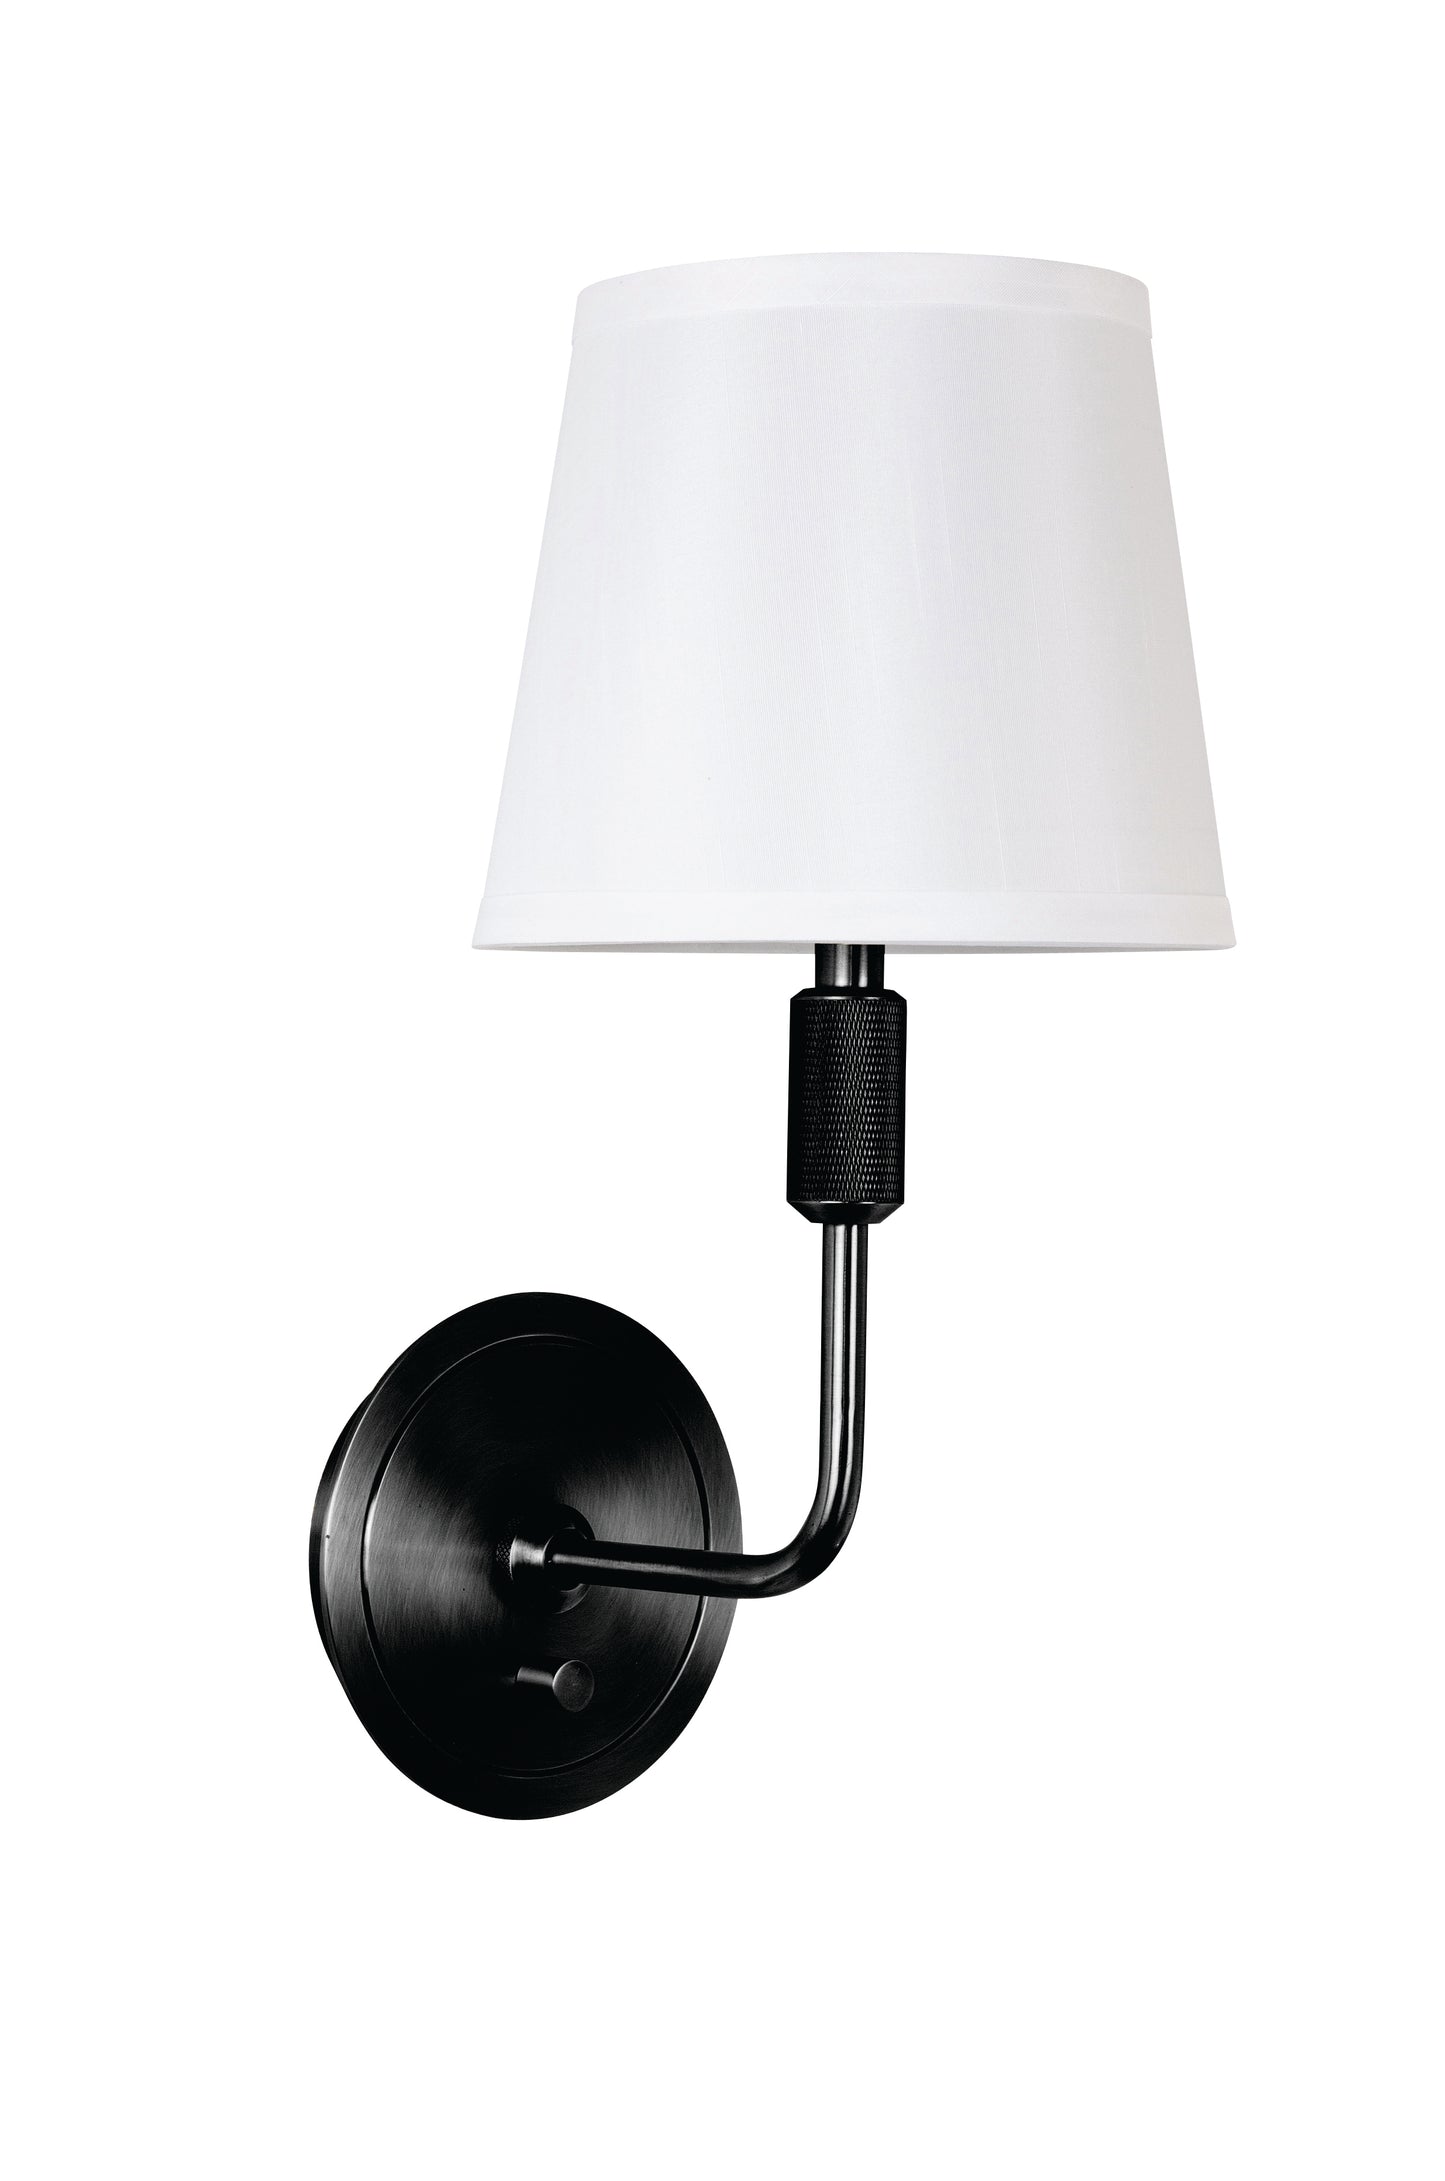 House of Troy Killington Black direct wire wall lamp with full range dimmer and hardback shade KL325-BLK